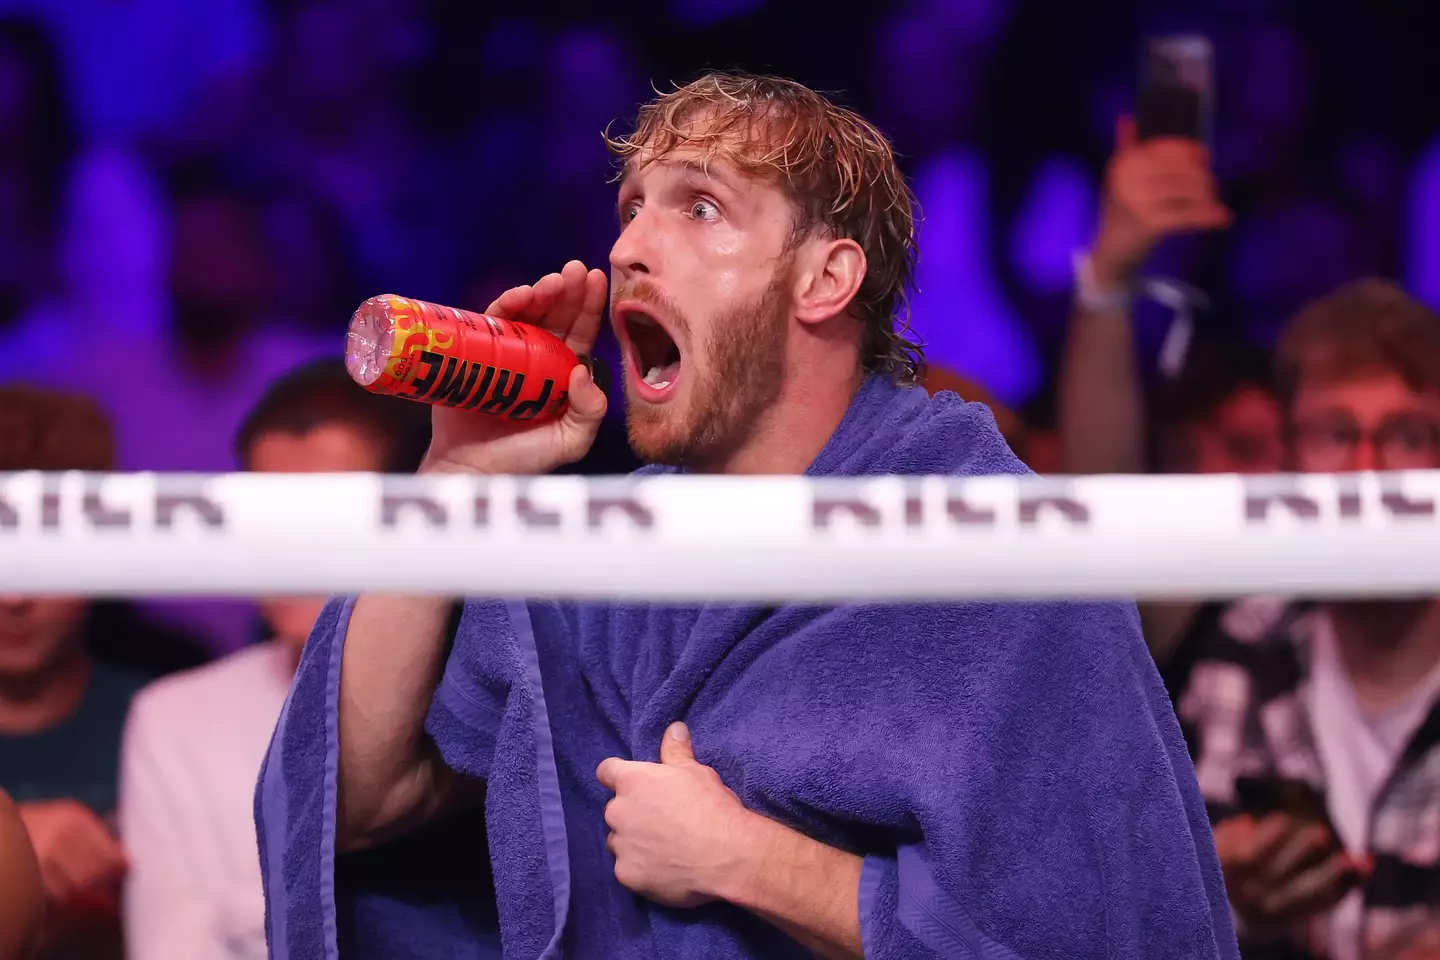 Logan Paul's Prime energy drink will appear on the canvas of the WWE ring. (